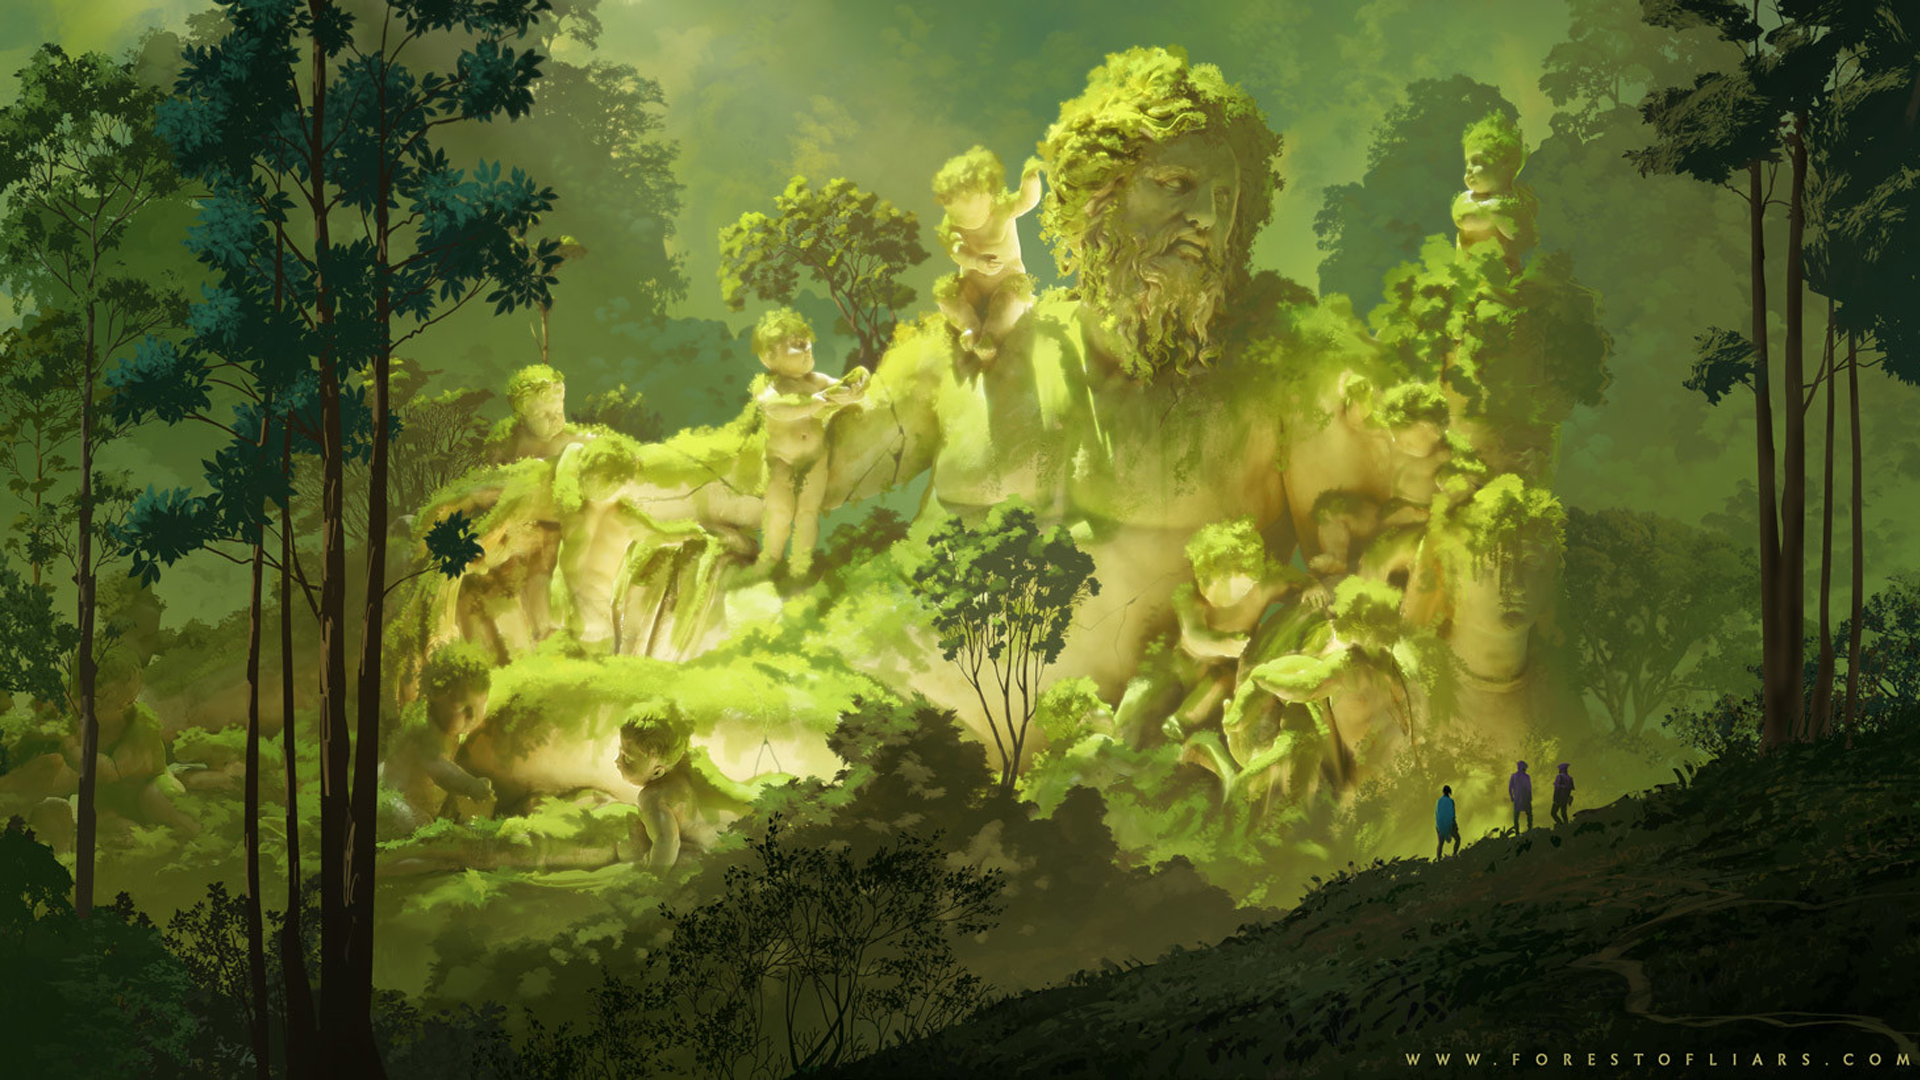 General 1920x1080 Sylvain Sarrailh Forest of Liars forest statue giant trees ruins artwork video game art digital art